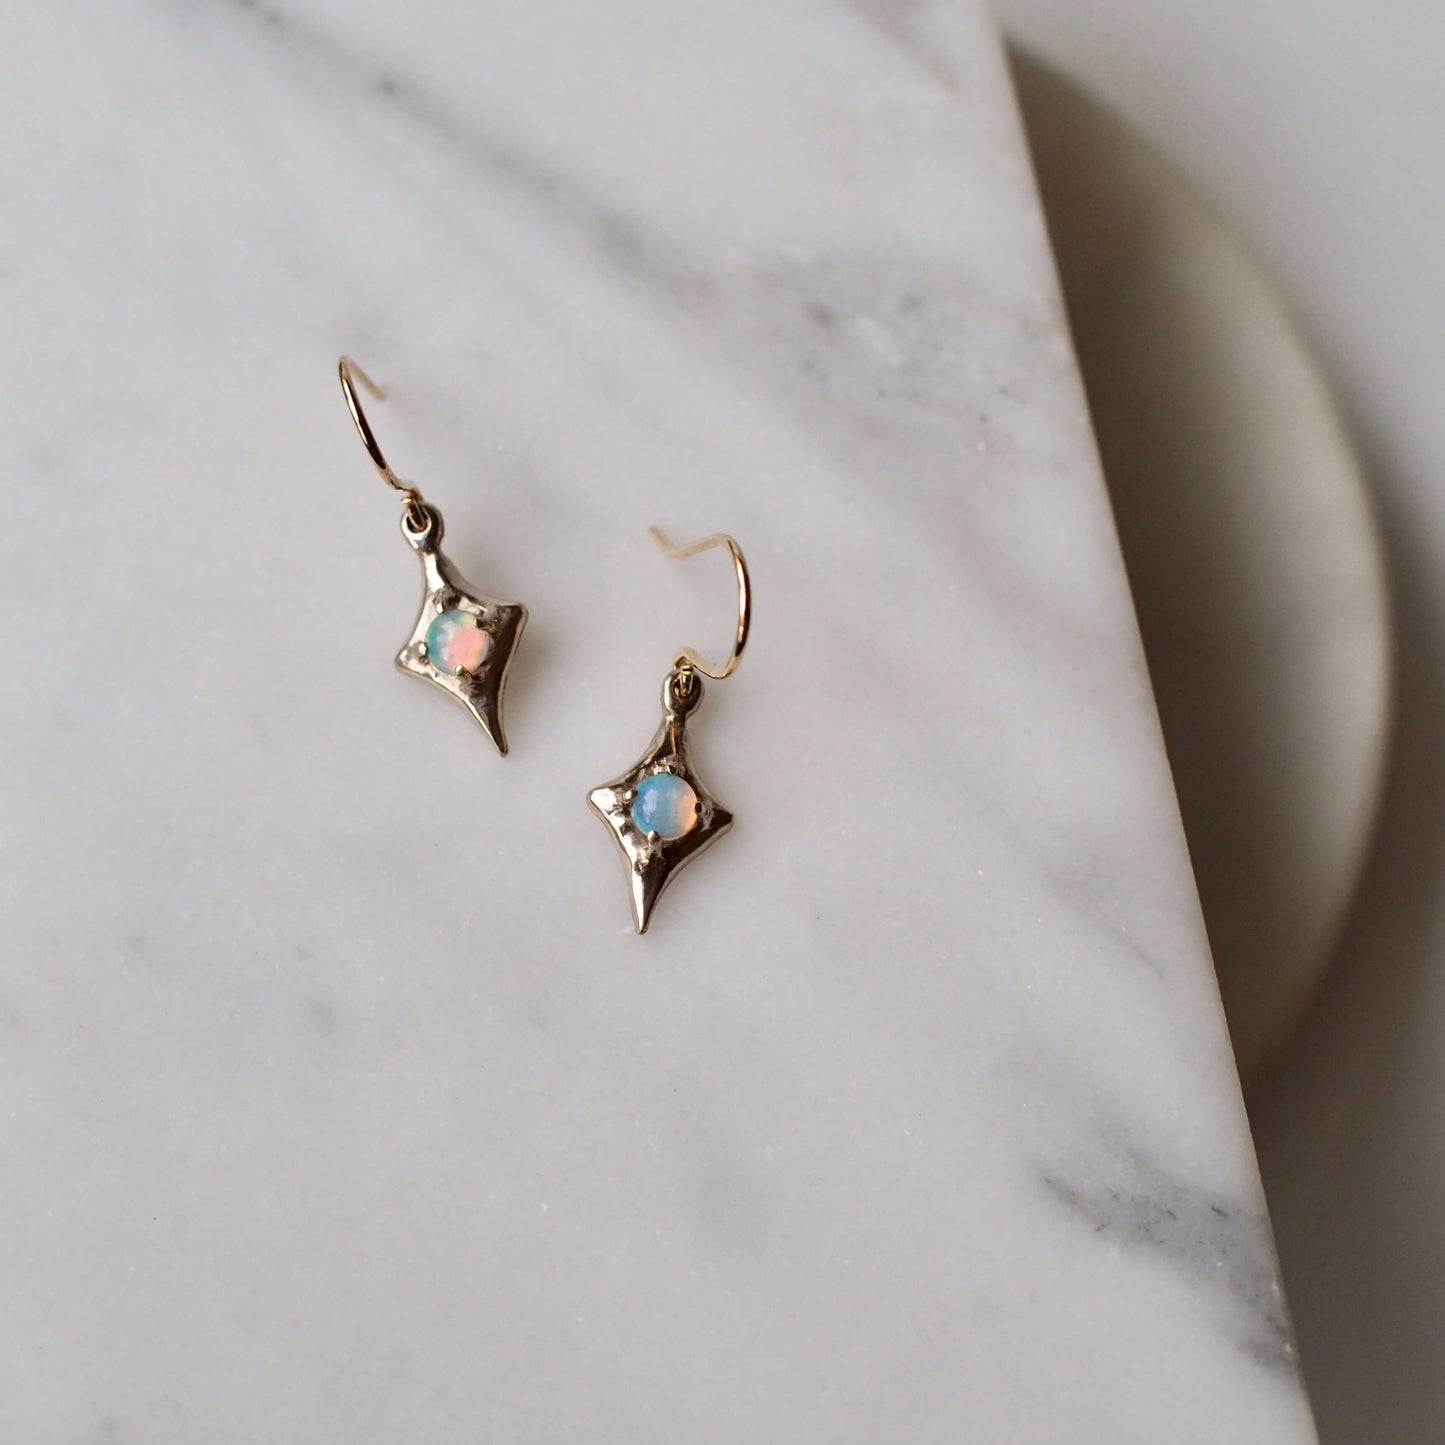 Four point star earrings from Iron Oxide designs set with 4mm natural opals on a marble backdrop